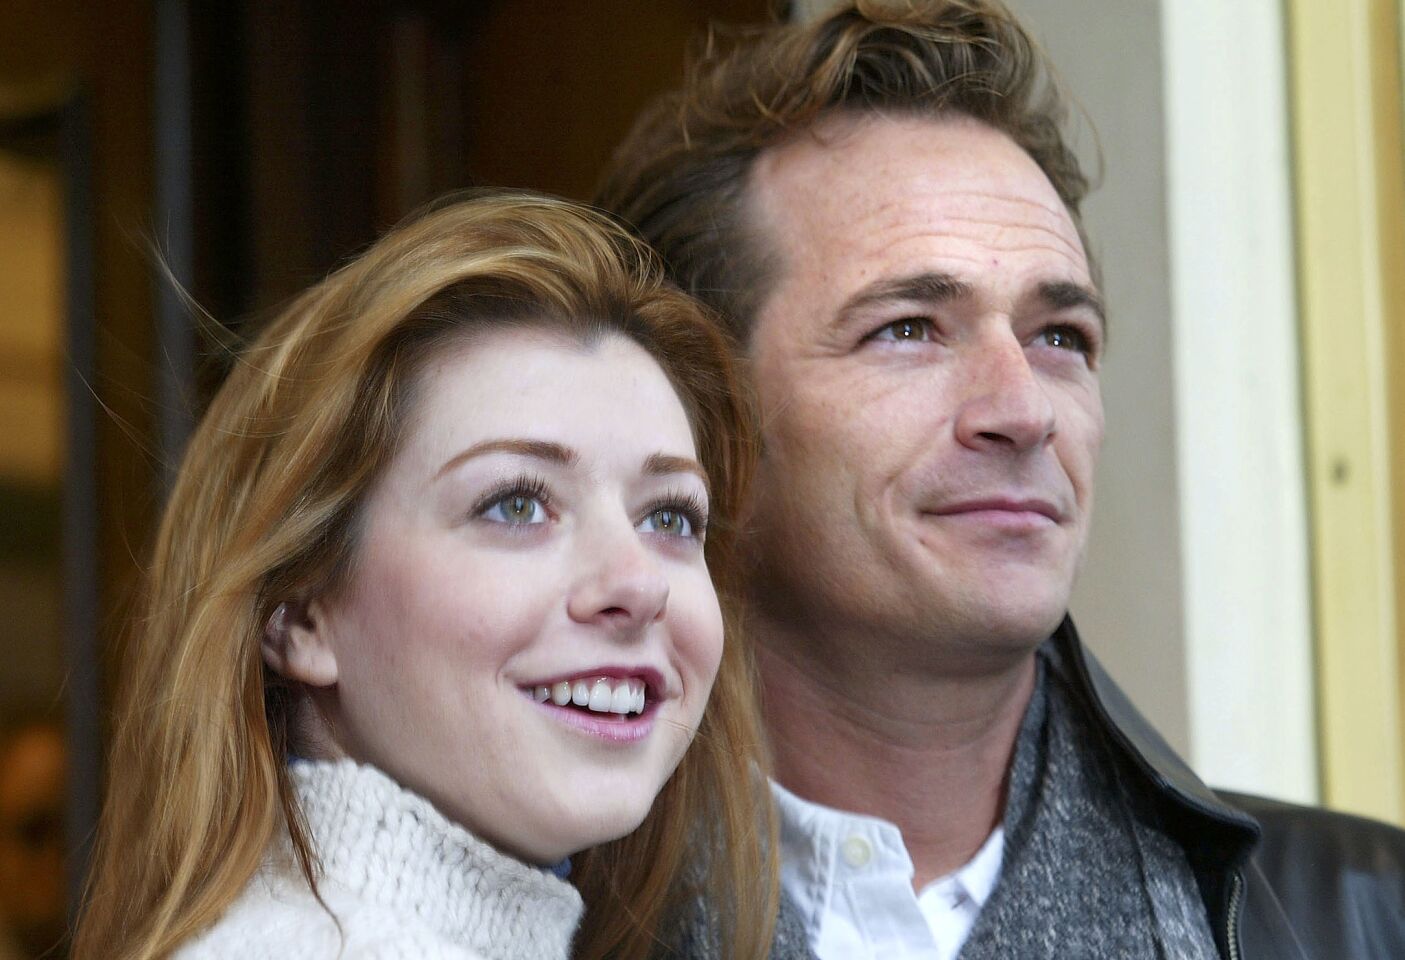 Luke Perry and Alyson Hannigan pose outside the Theatre Royal in London as they start rehearsals for a stage production of 'When Harry Met Sally..." on Jan. 8, 2004.